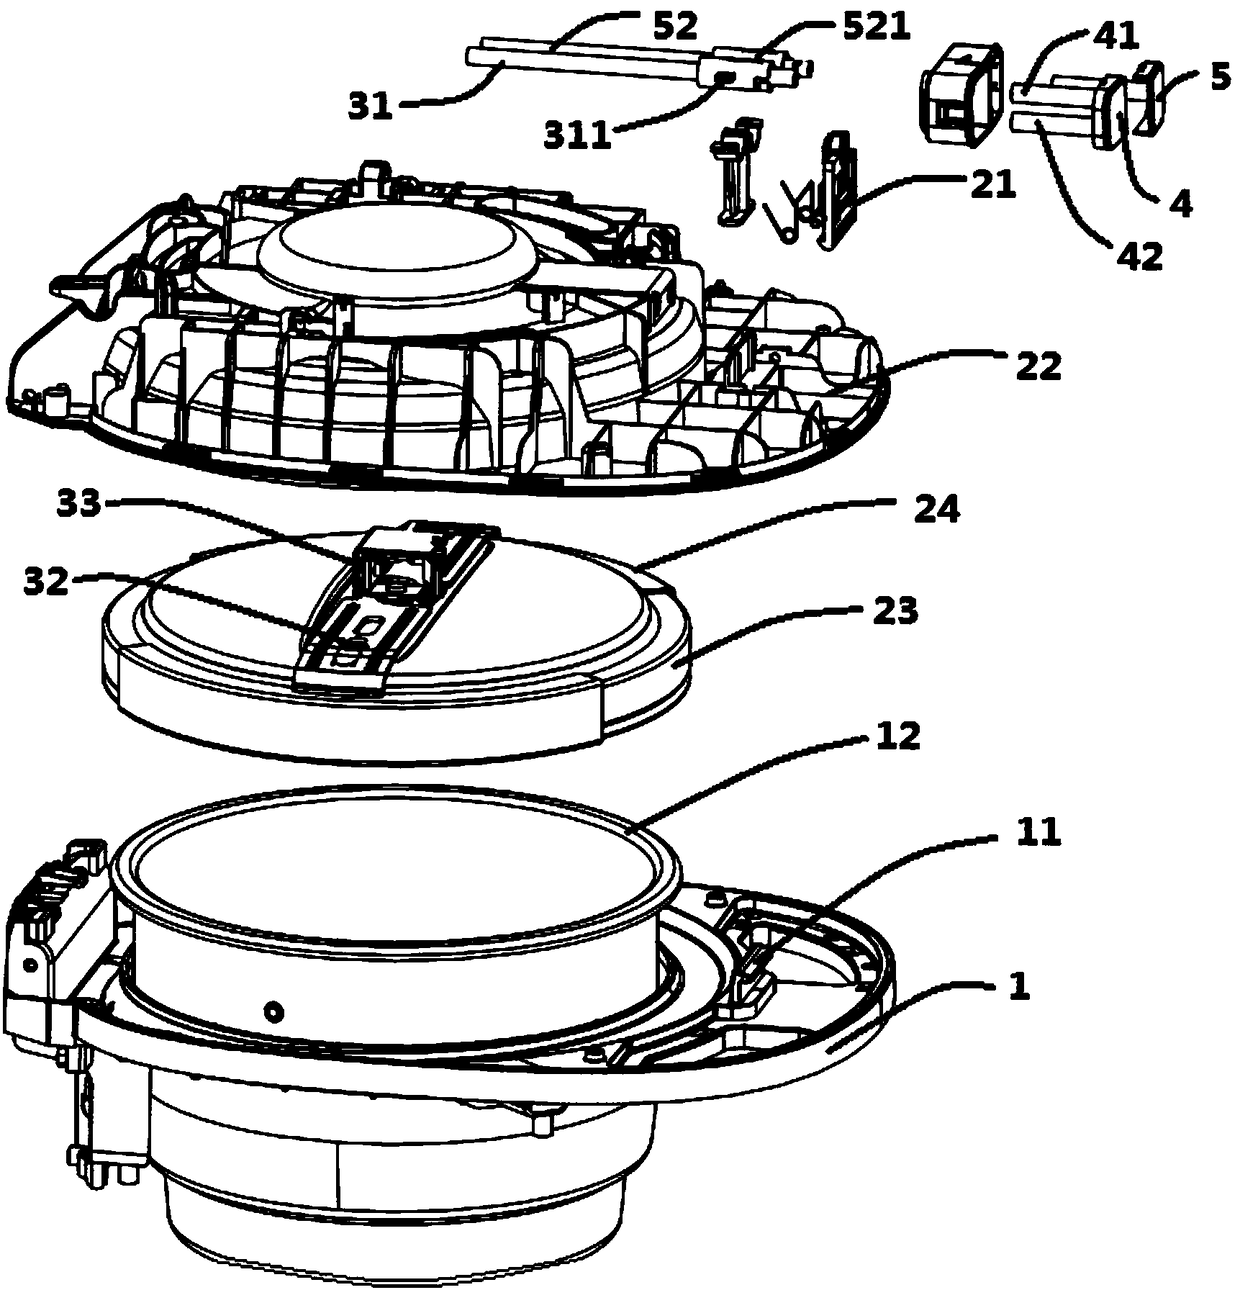 Integrated pressure cooker facilitating lid opening